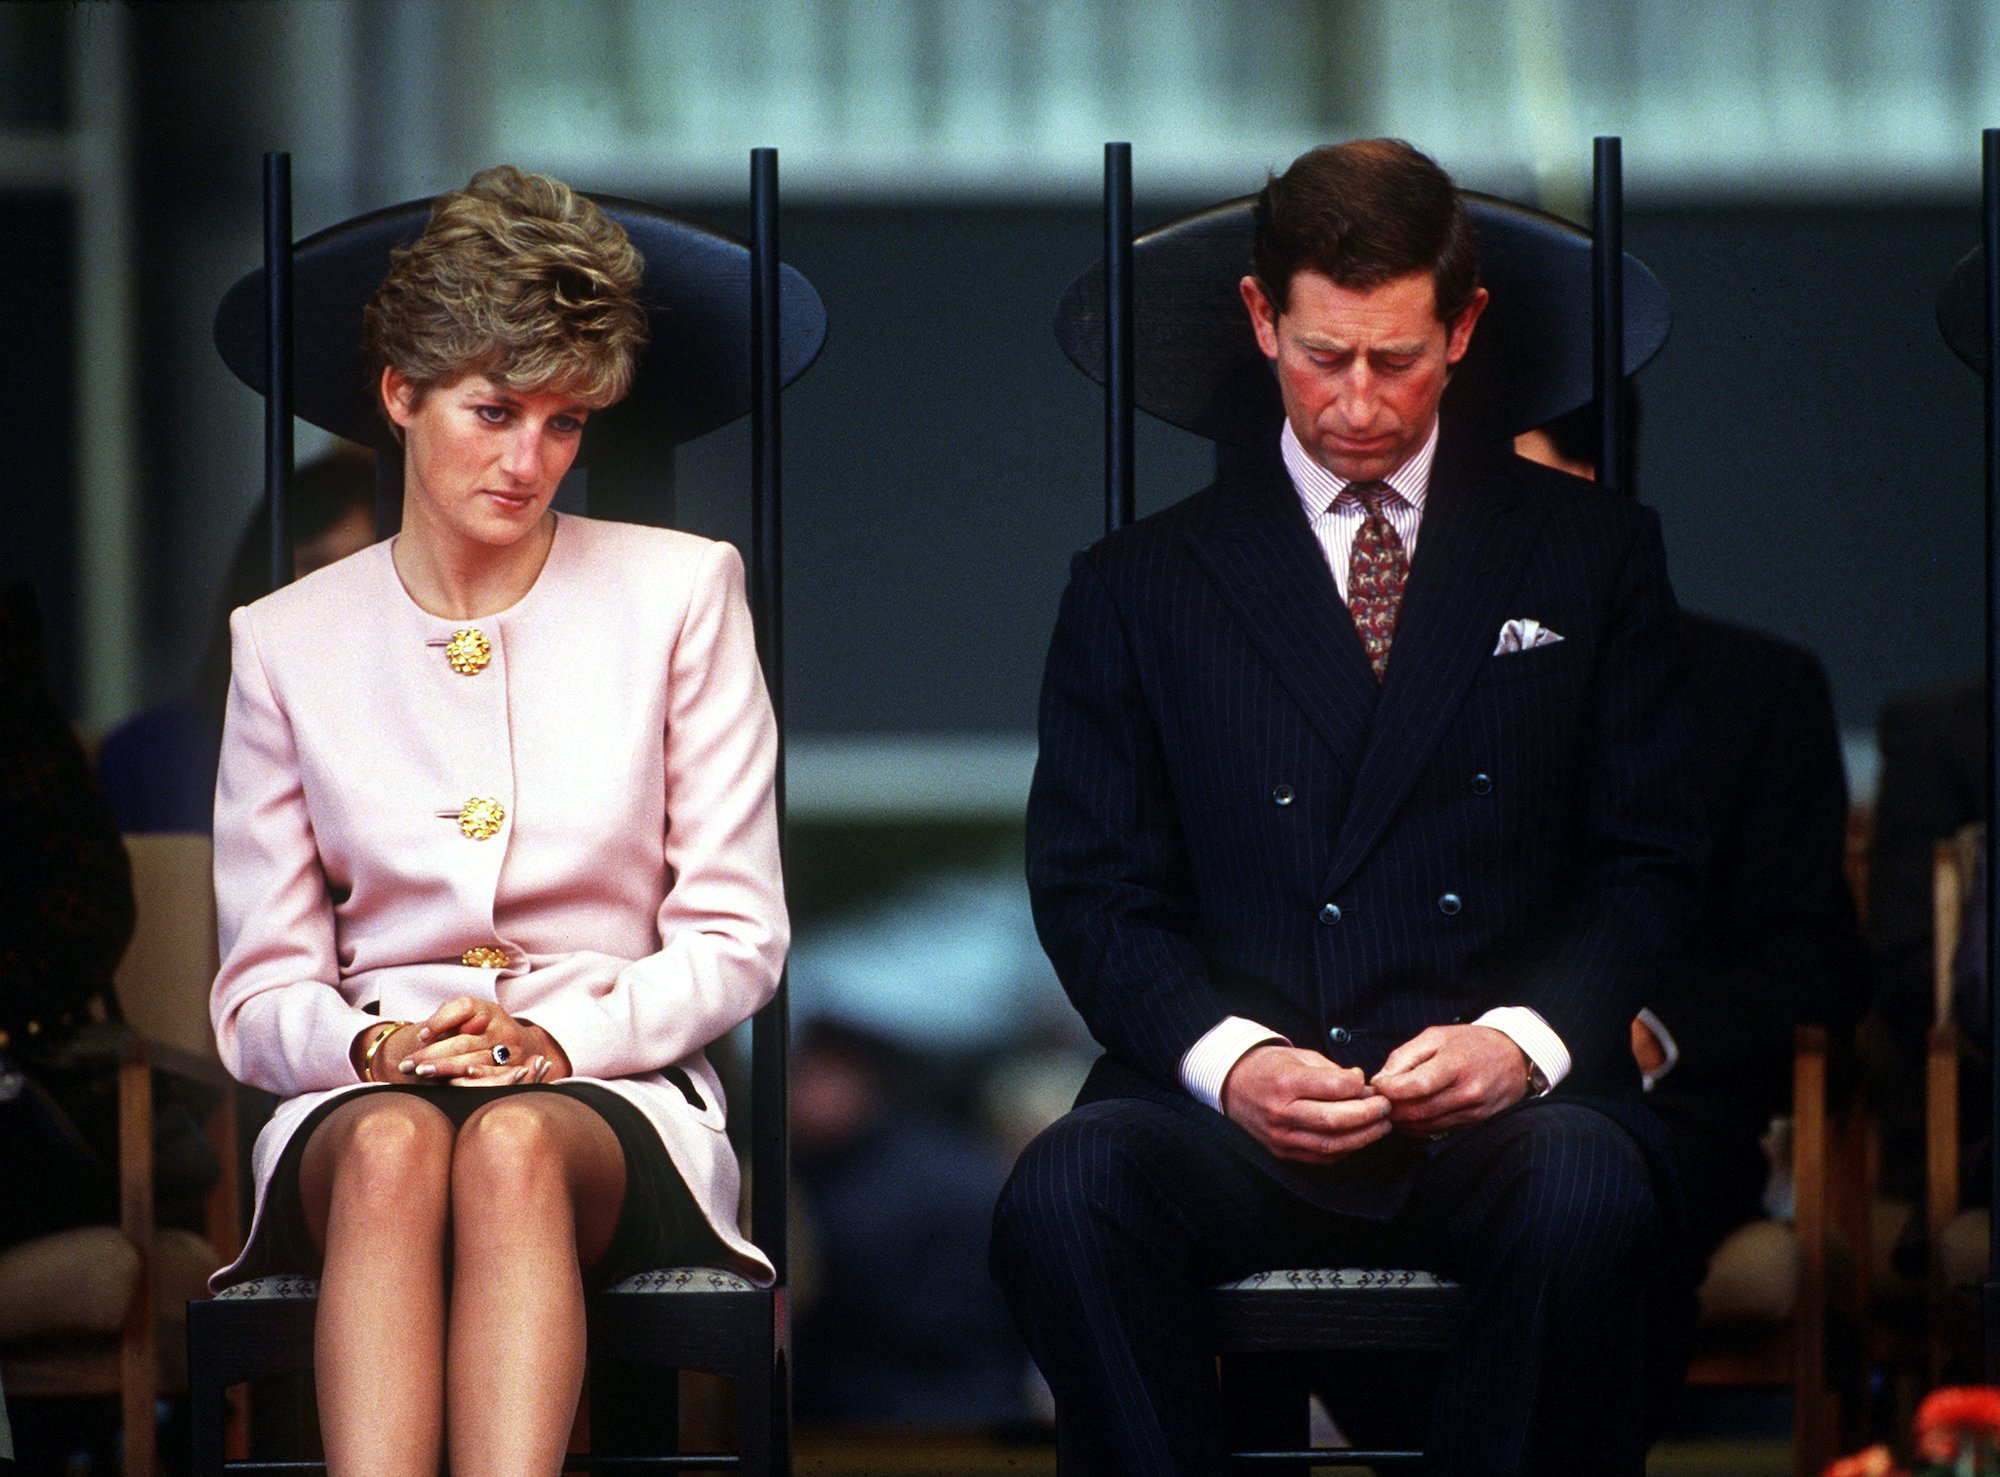 Princess Diana and Prince Charles attend a welcome ceremony in Canada